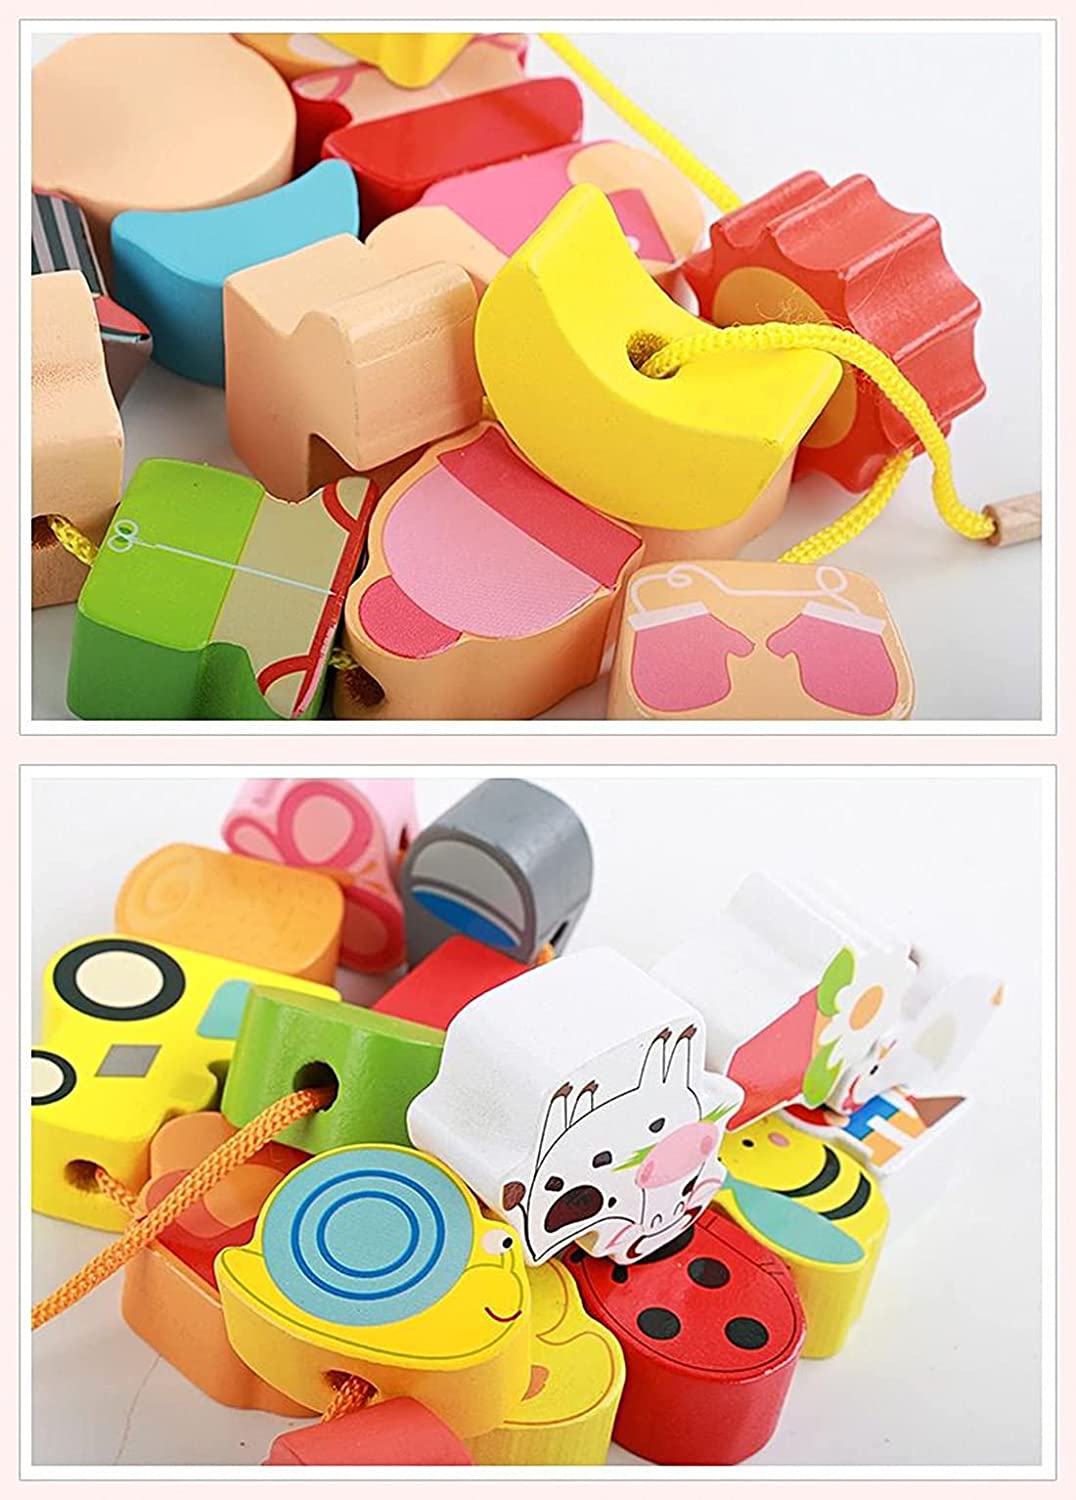 Farm Toy Wooden Block Set, Early Educational Toys String & Lacing Beads Games for Toddlers Kids Farm Animal Learning Play Set